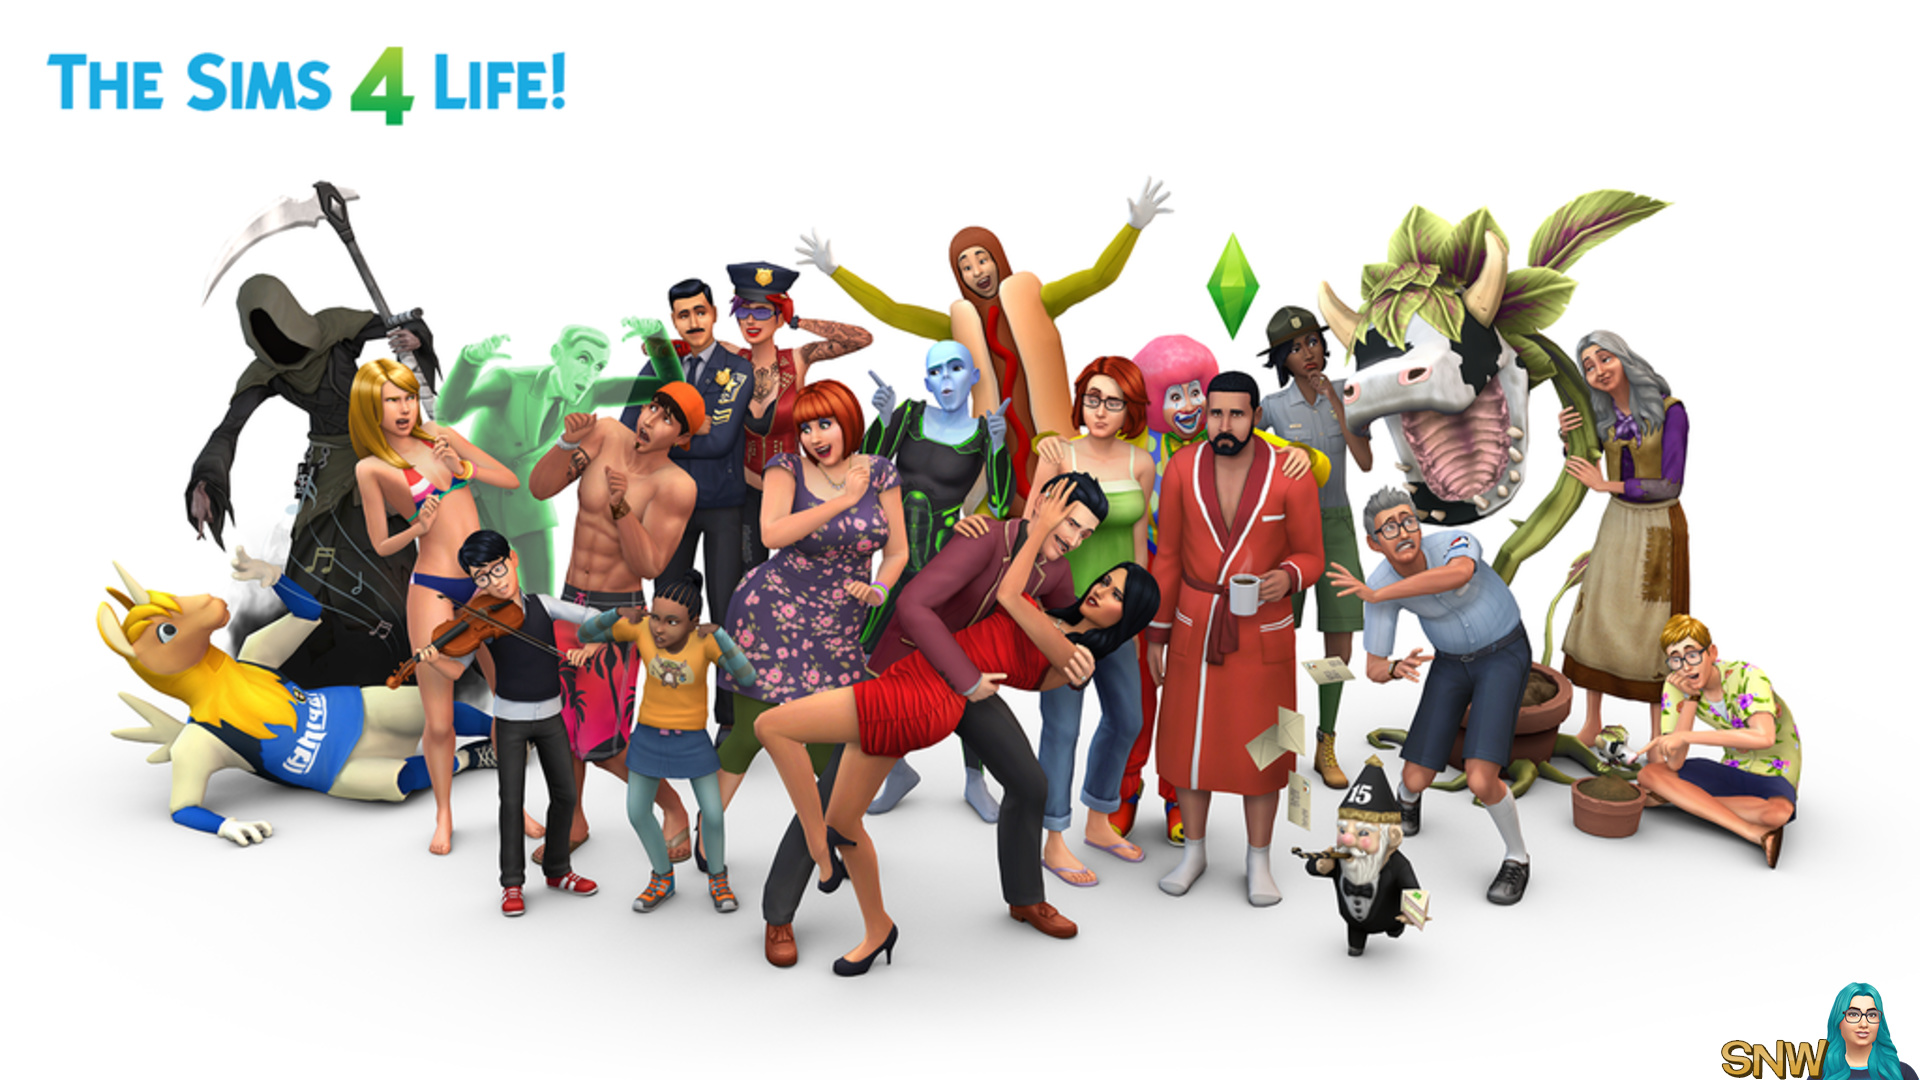 The Sims 4 Life